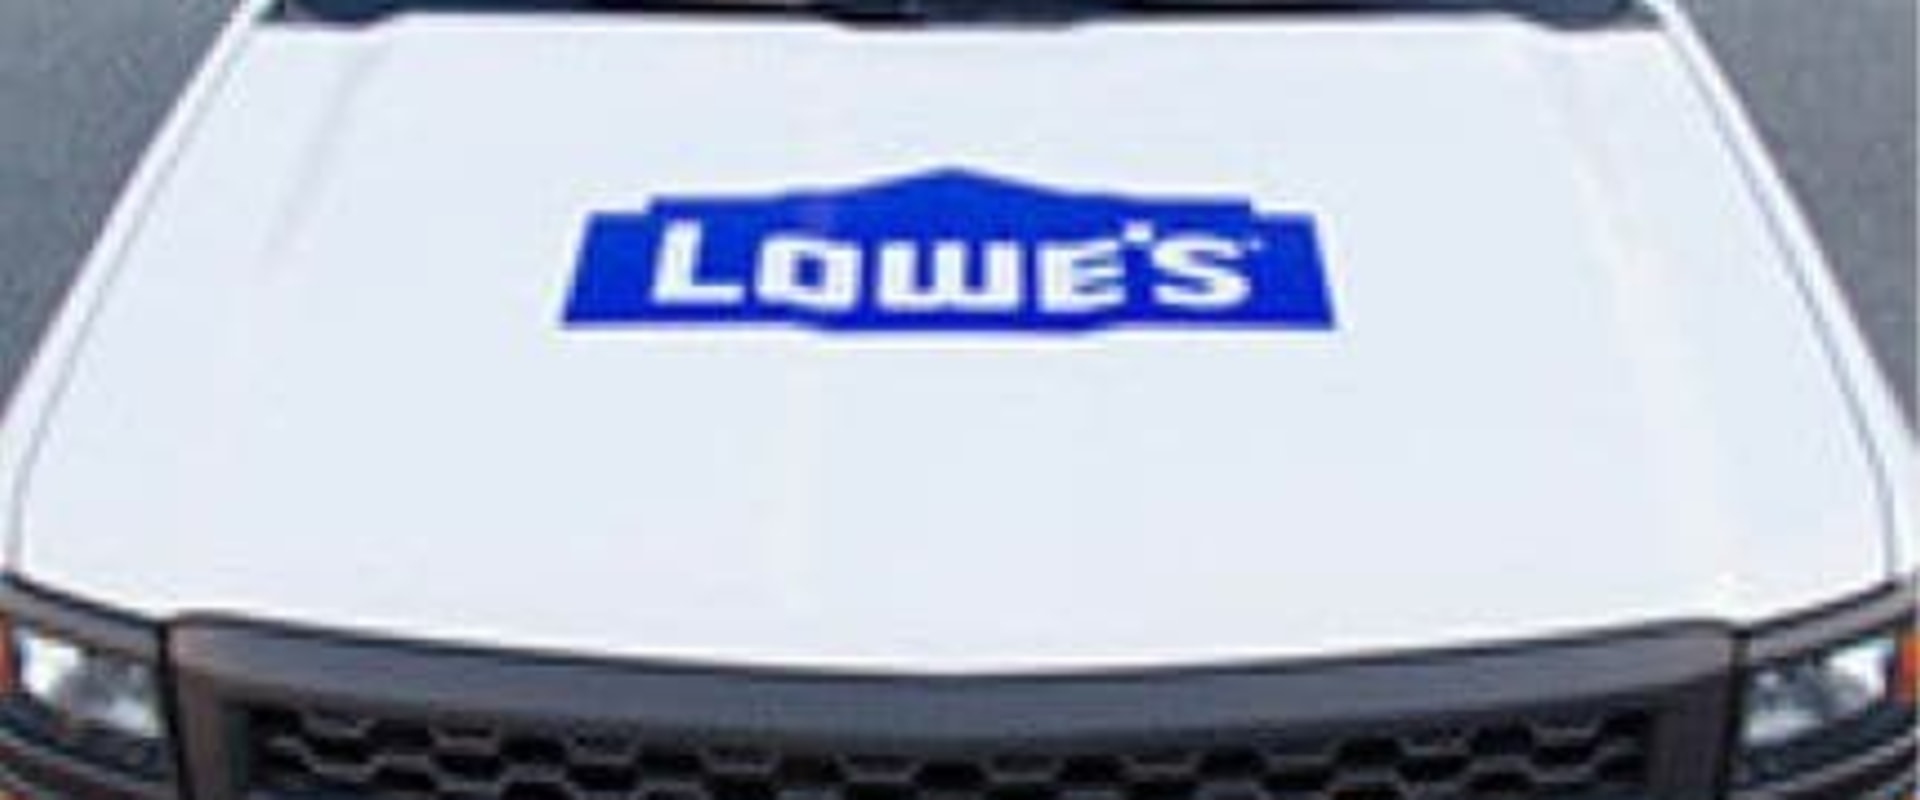 Does lowes do truck rental?